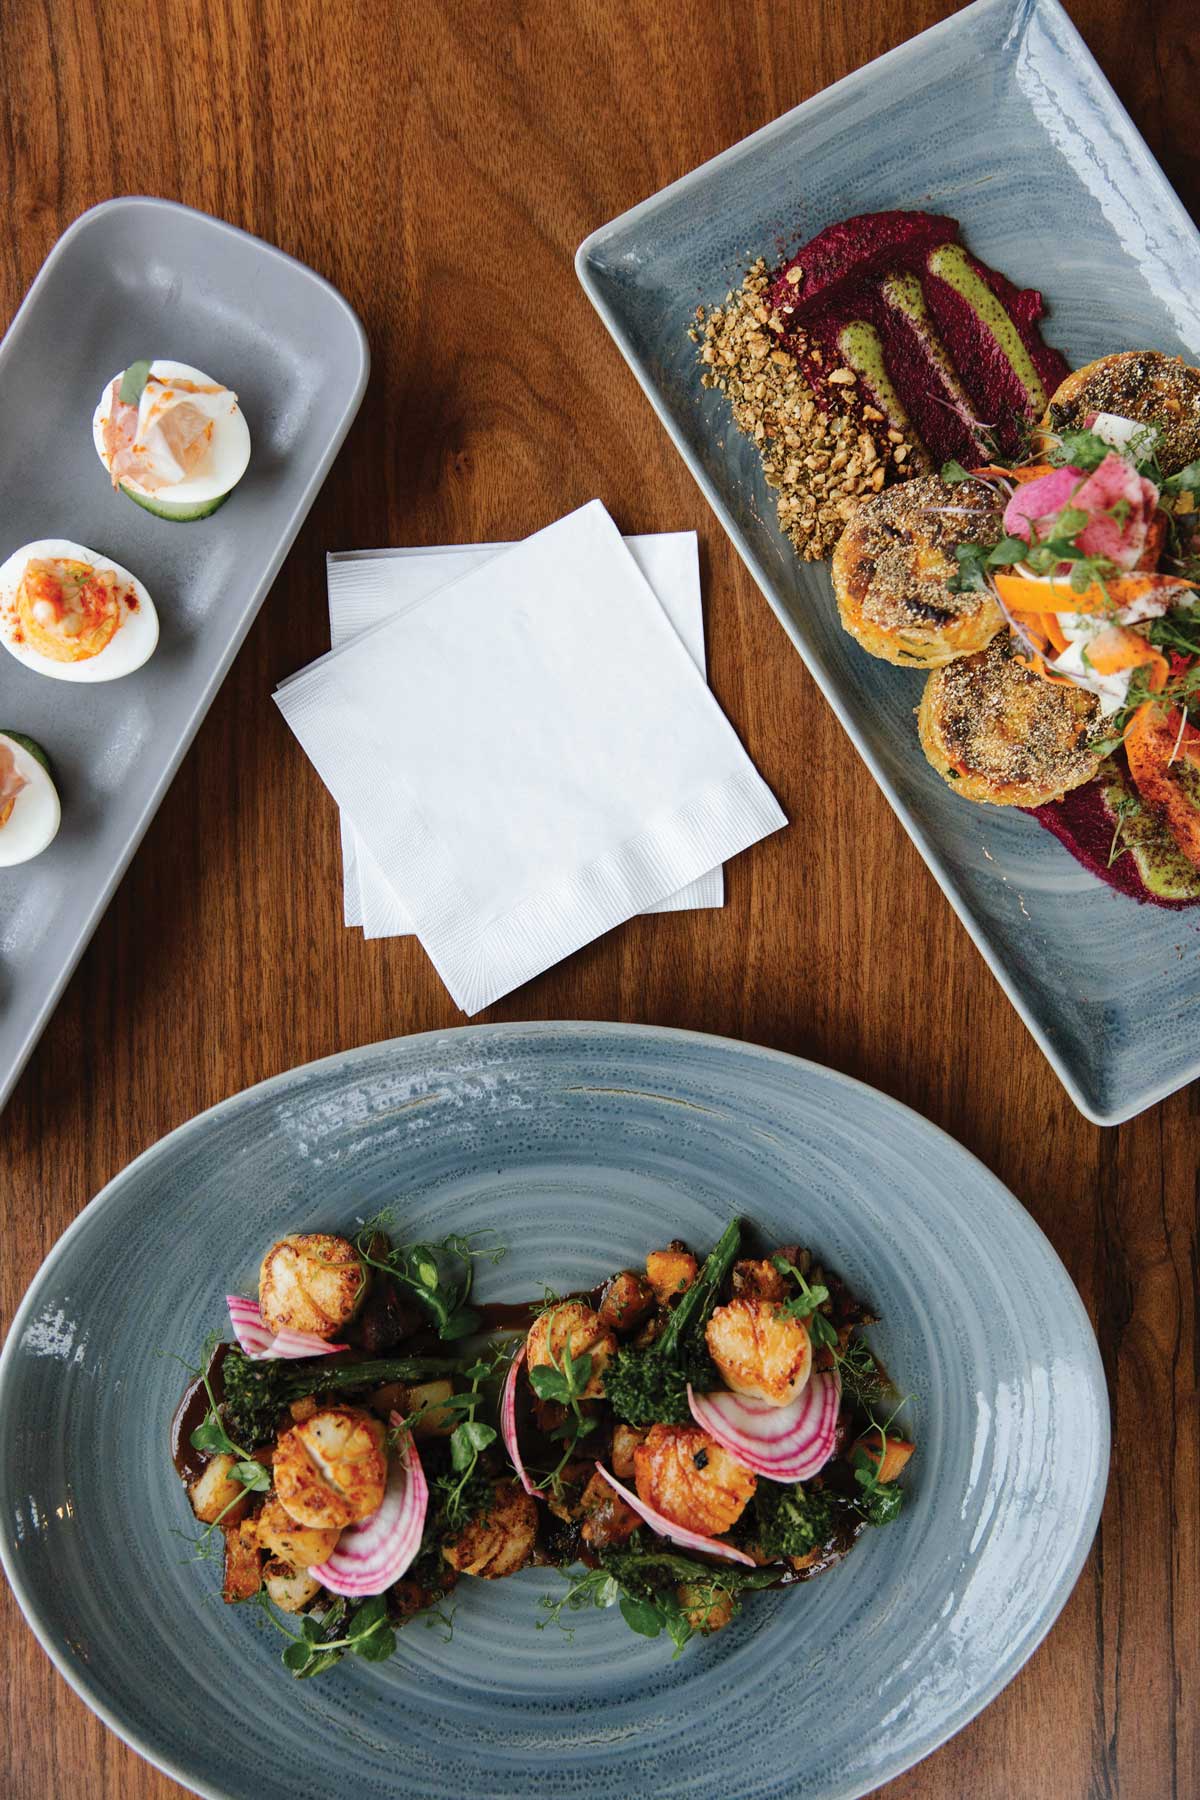 Deviled eggs, veggie cakes with beet hummus, and scallops from Waterville's Front & Main